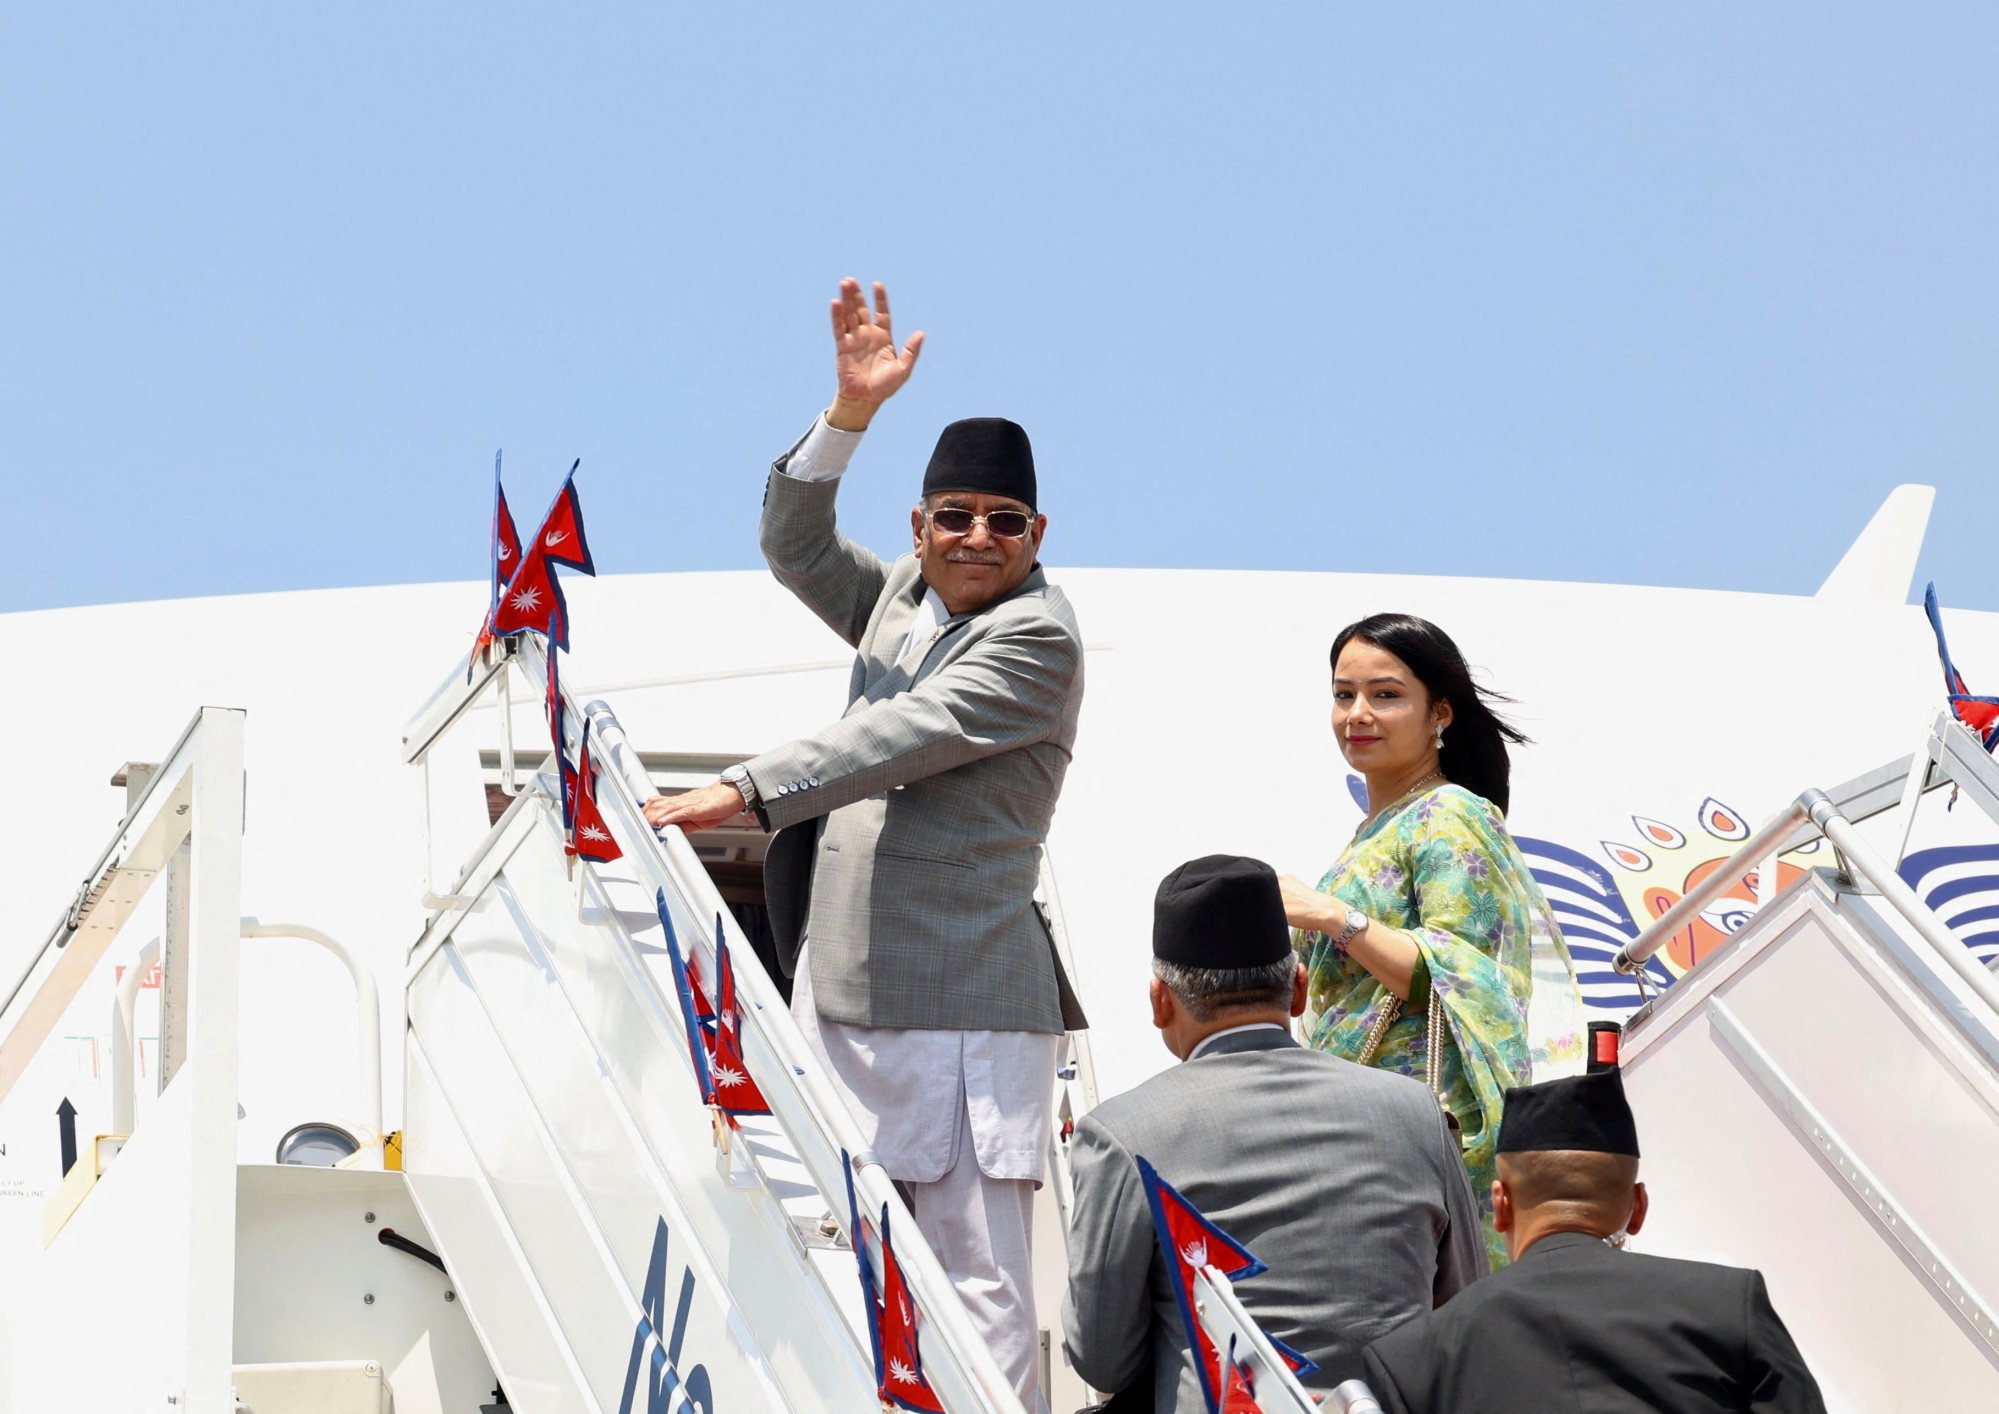 Days before Prime Minister Pushpa Kamal Dahal flew to Delhi, key leaders of his Nepal Communist Party asked that he hold a referendum on whether Nepal should remain secular. Photo: Prime Minister’s Office of Nepal Handout via Reuters